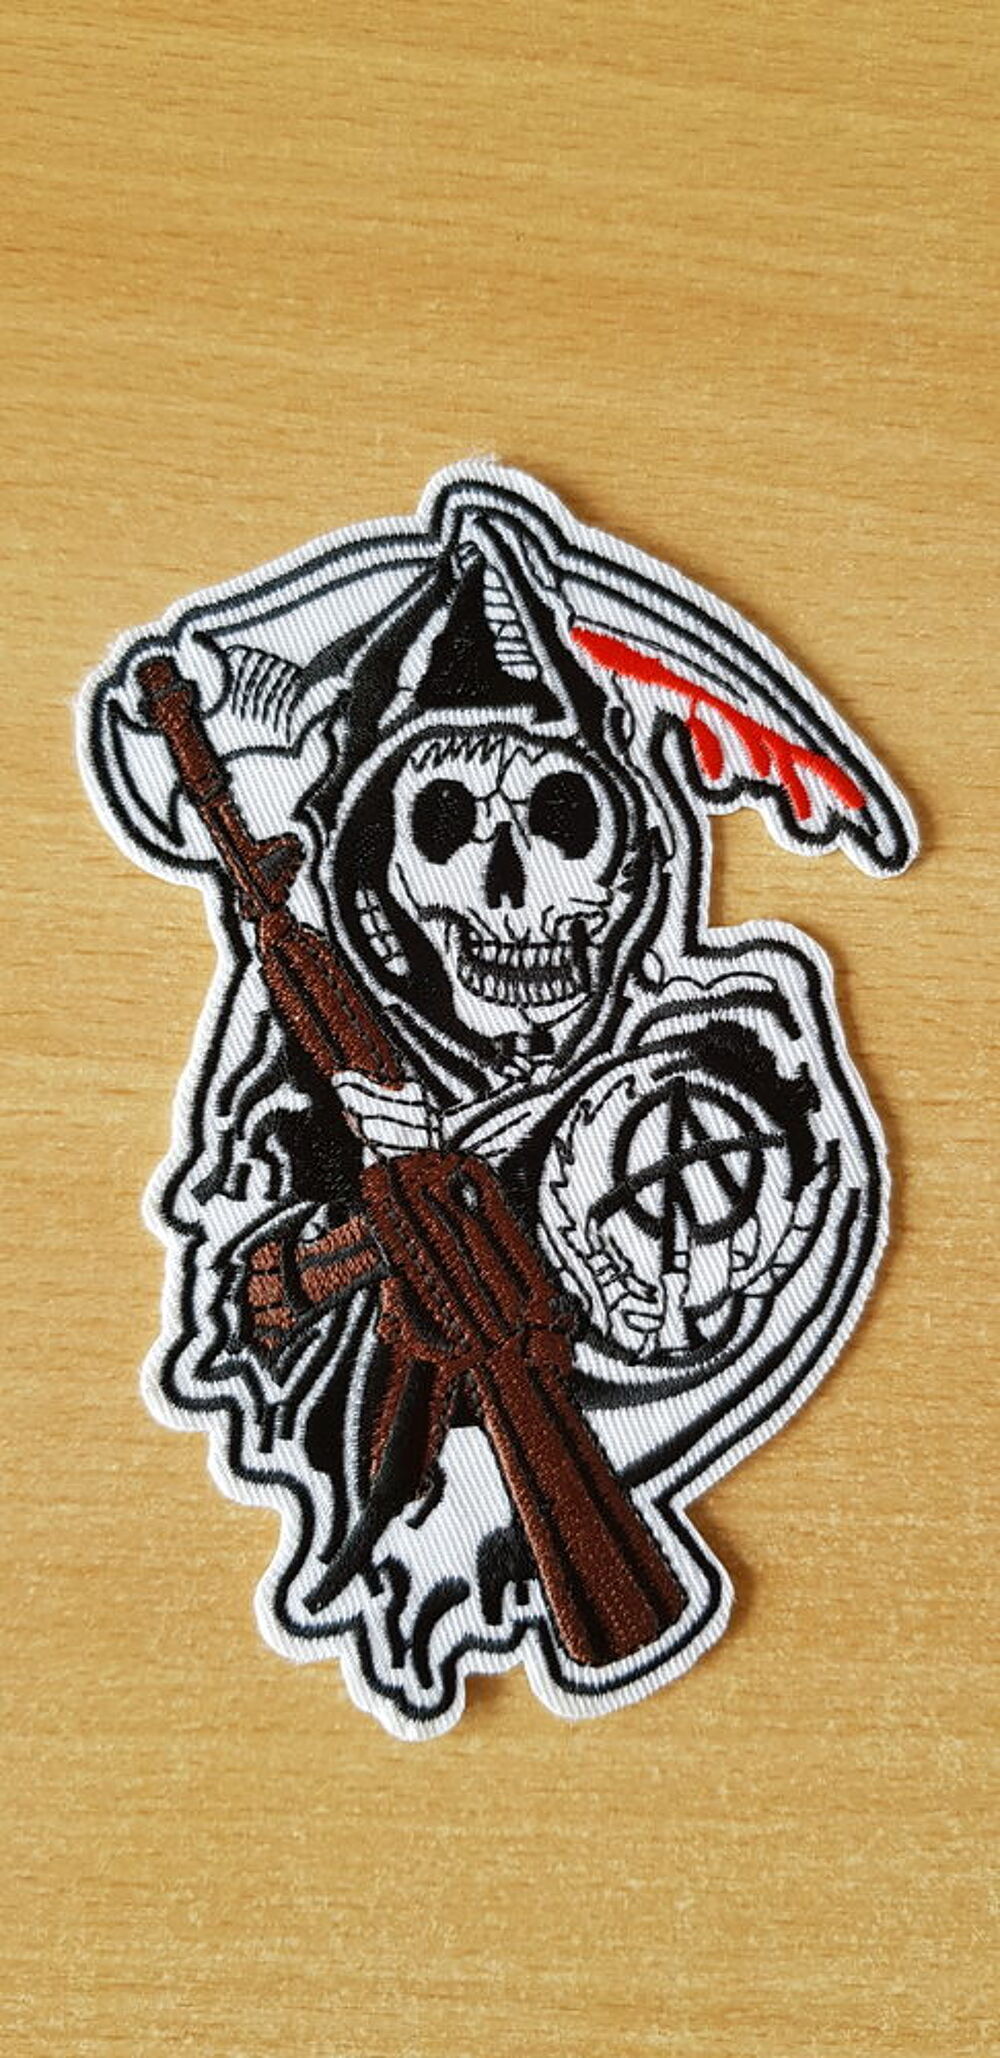 &Eacute;cusson sons of anarchy 13x8 cm thermocollant 